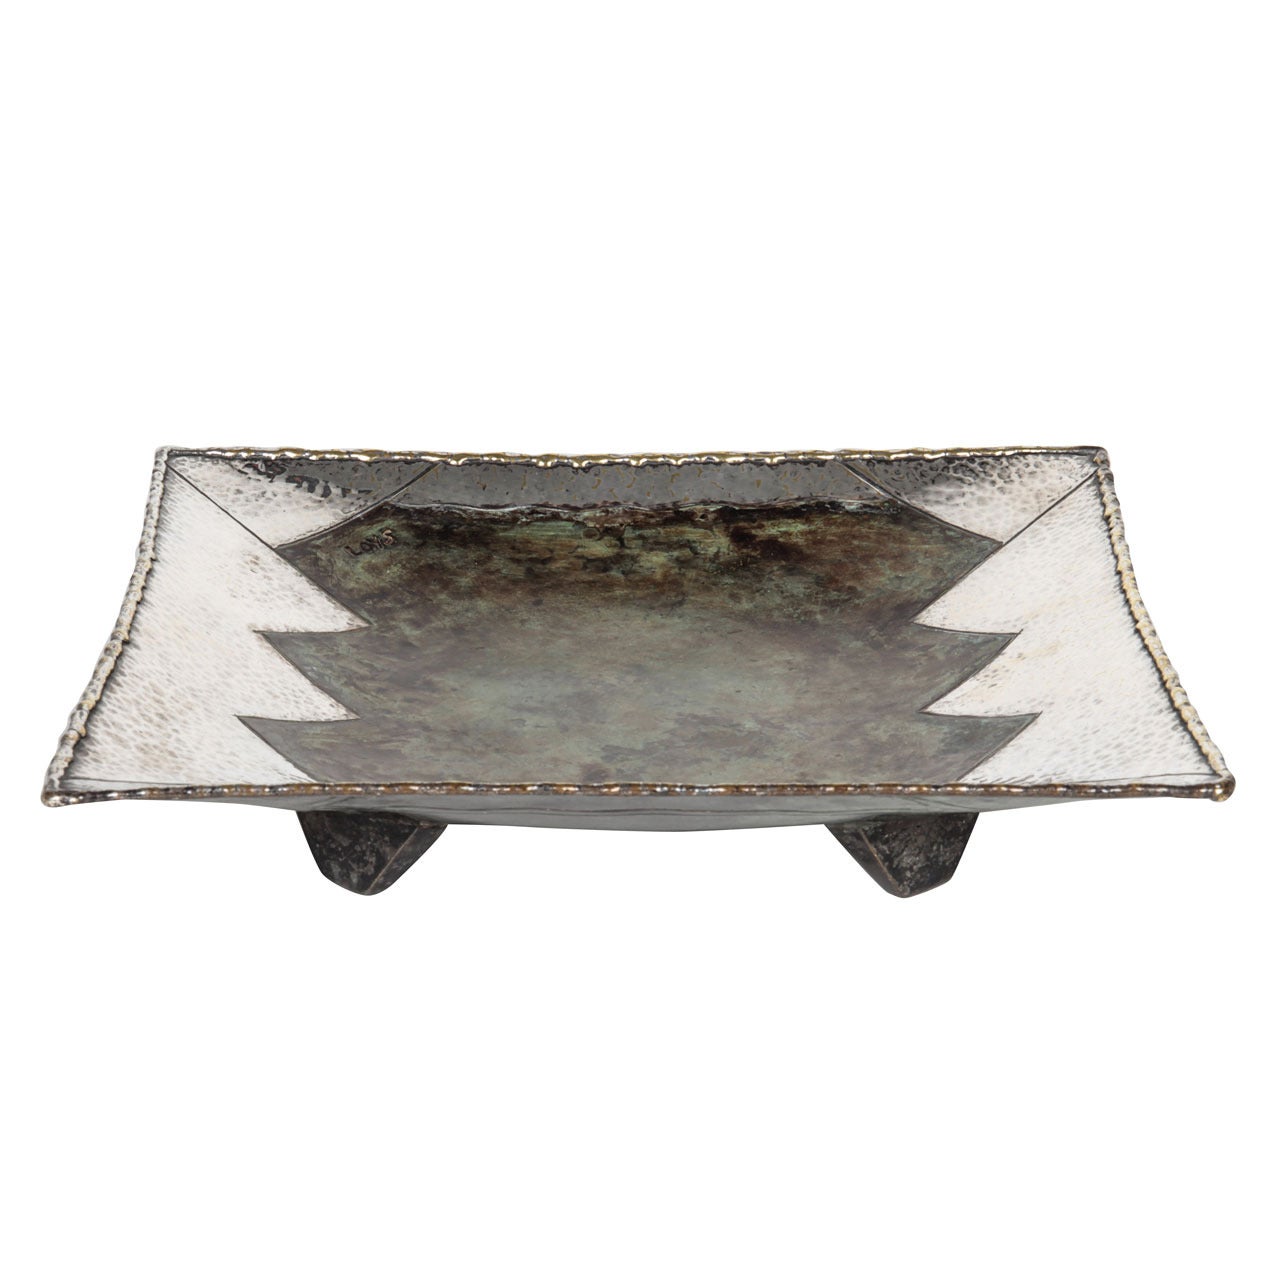 Loys Lucha / French Art Deco Dinanderie “Zig Zag” Square footed dish c. 1925 For Sale